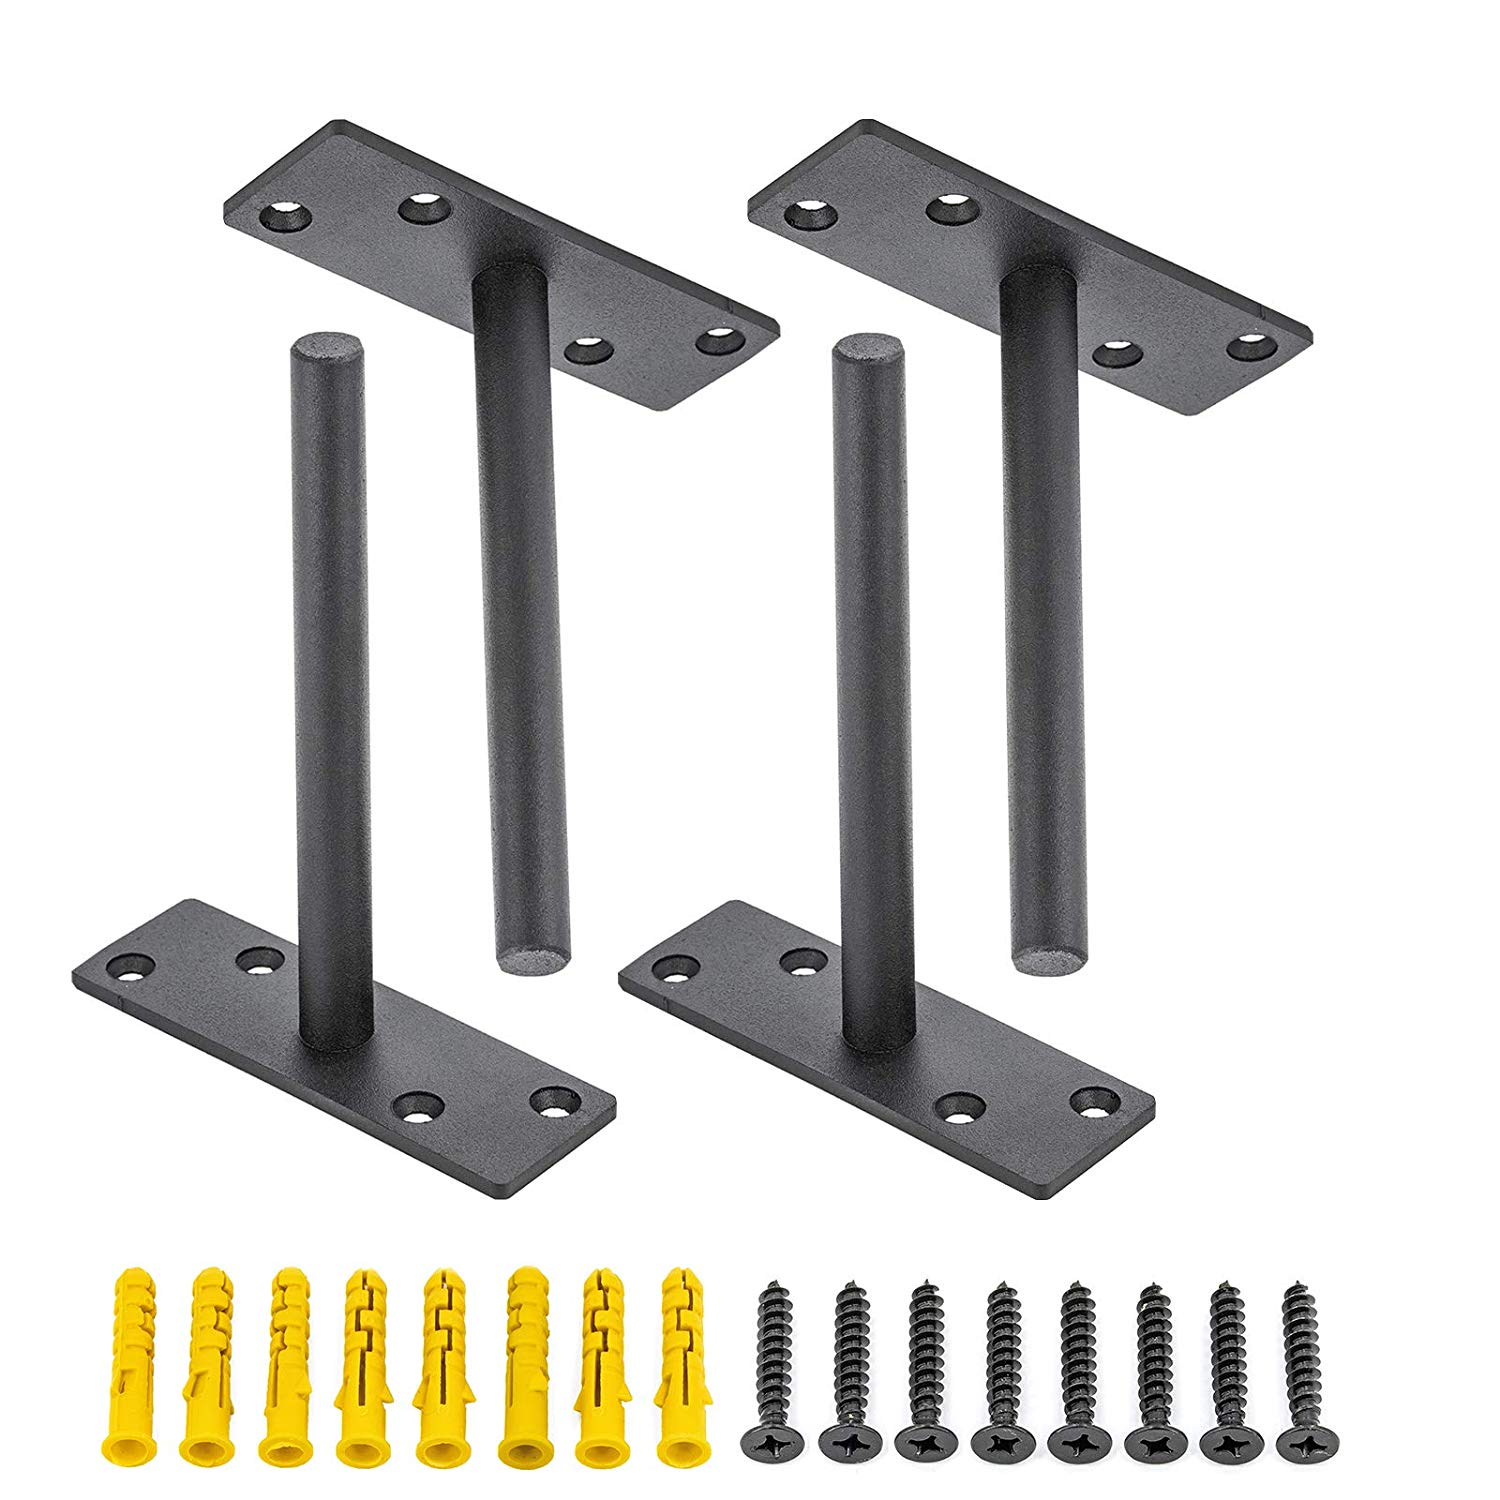 floating shelf brackets hardware find rod post get quotations blind supports lontan solid steel with black book shelves inch deep wood ikea media cabinet beam wall unit garage